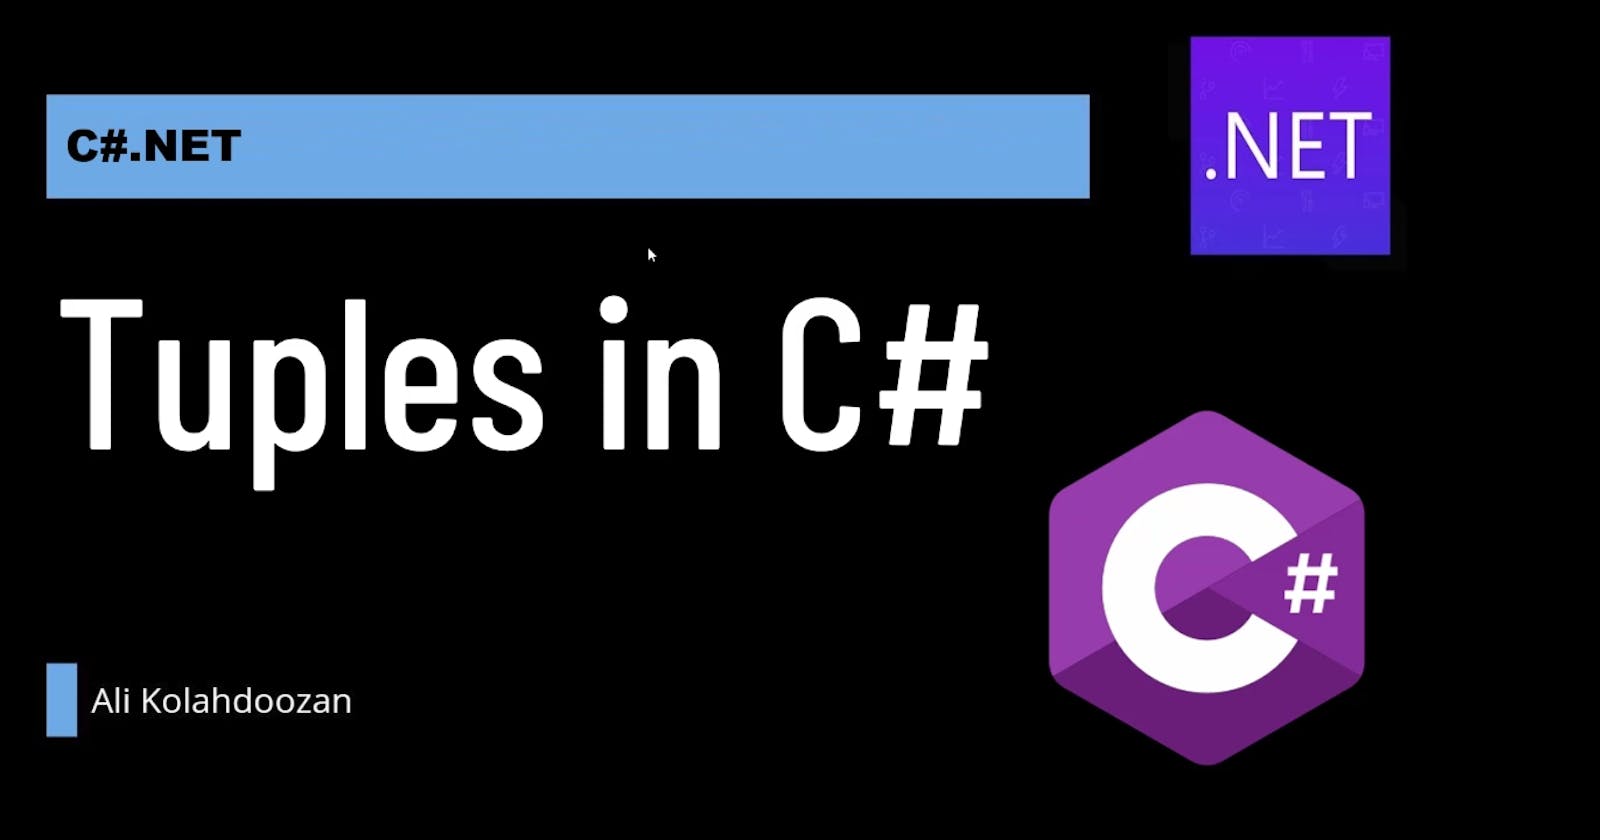 Tuples in C#